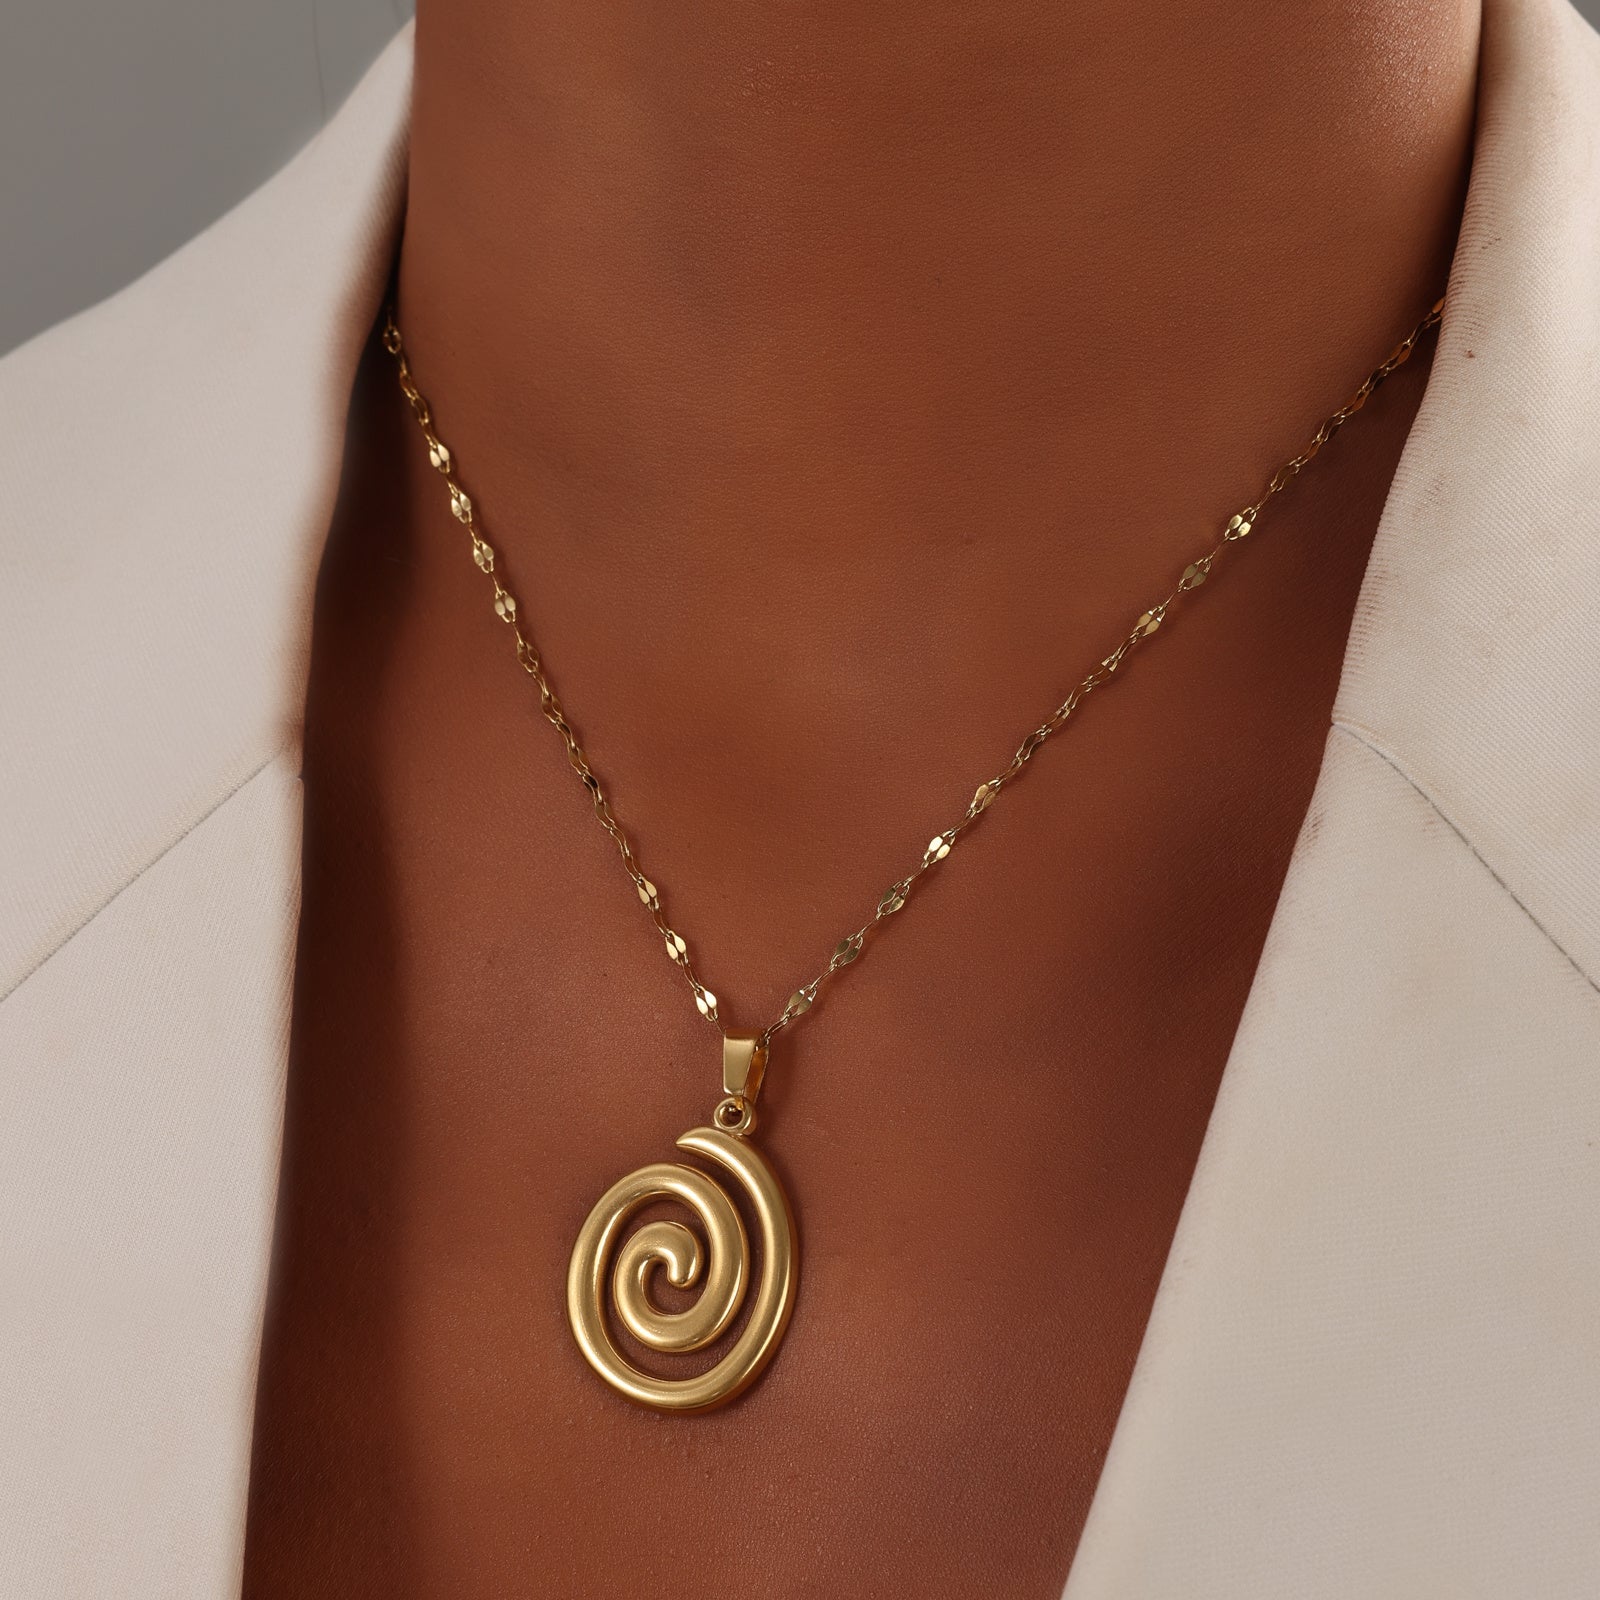 Unique And Niche Design Pendant, Stainless Steel Plated With 18k Gold, Creative And Versatile Geometric Vortex Necklace